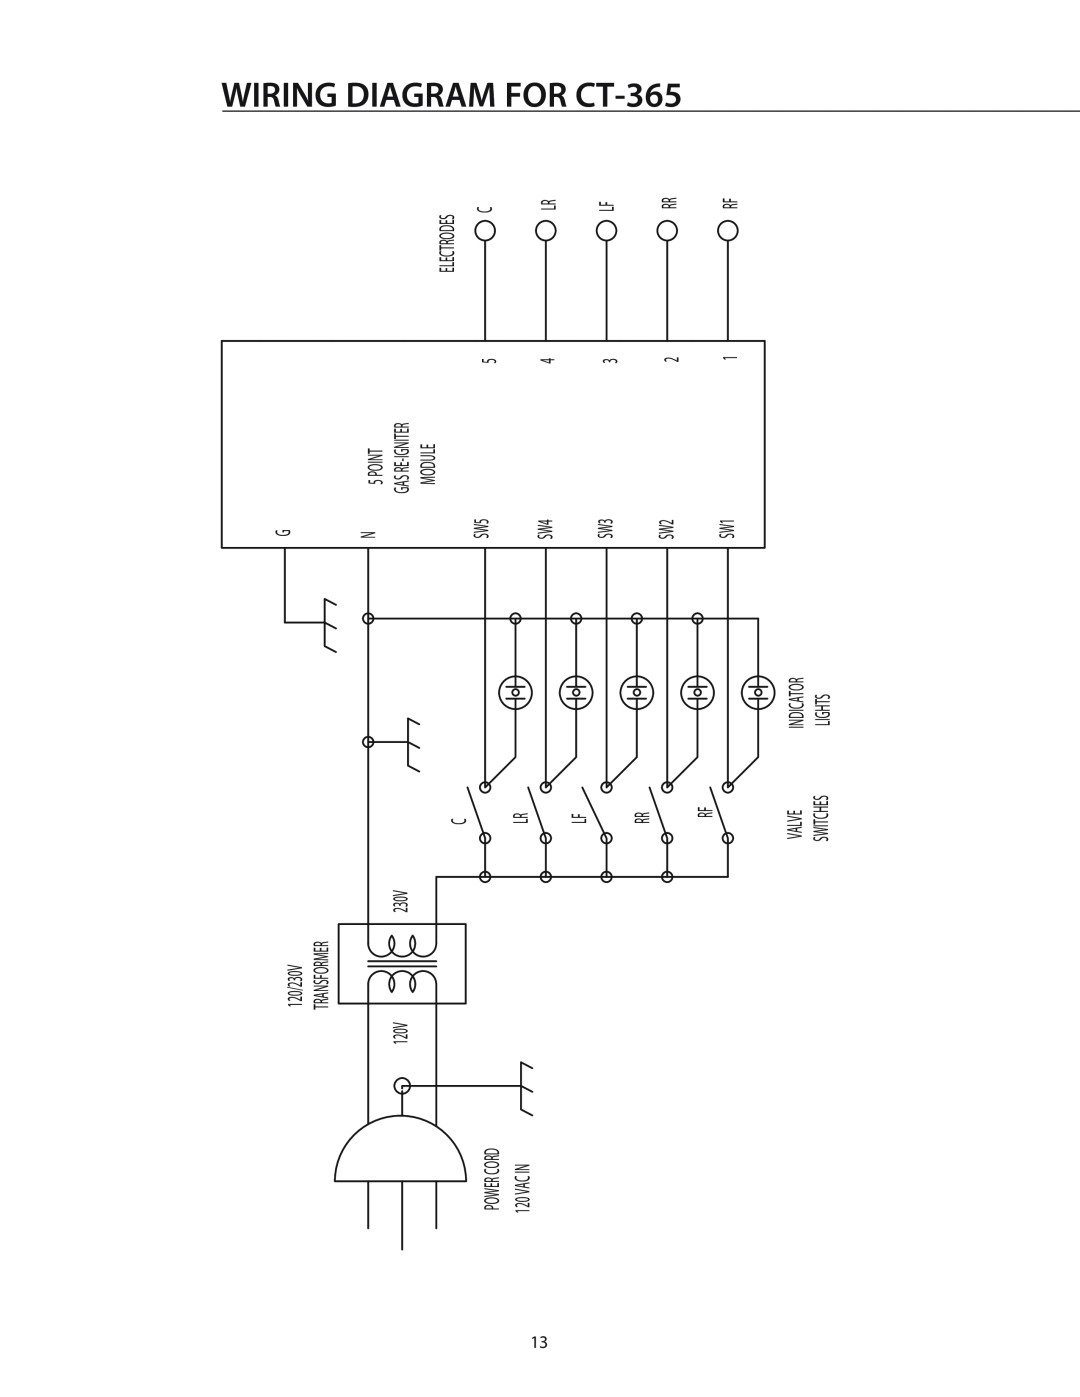 DCS T-365BK, CT-365SS installation manual DIAGRAM FOR CT-365, Wiring 